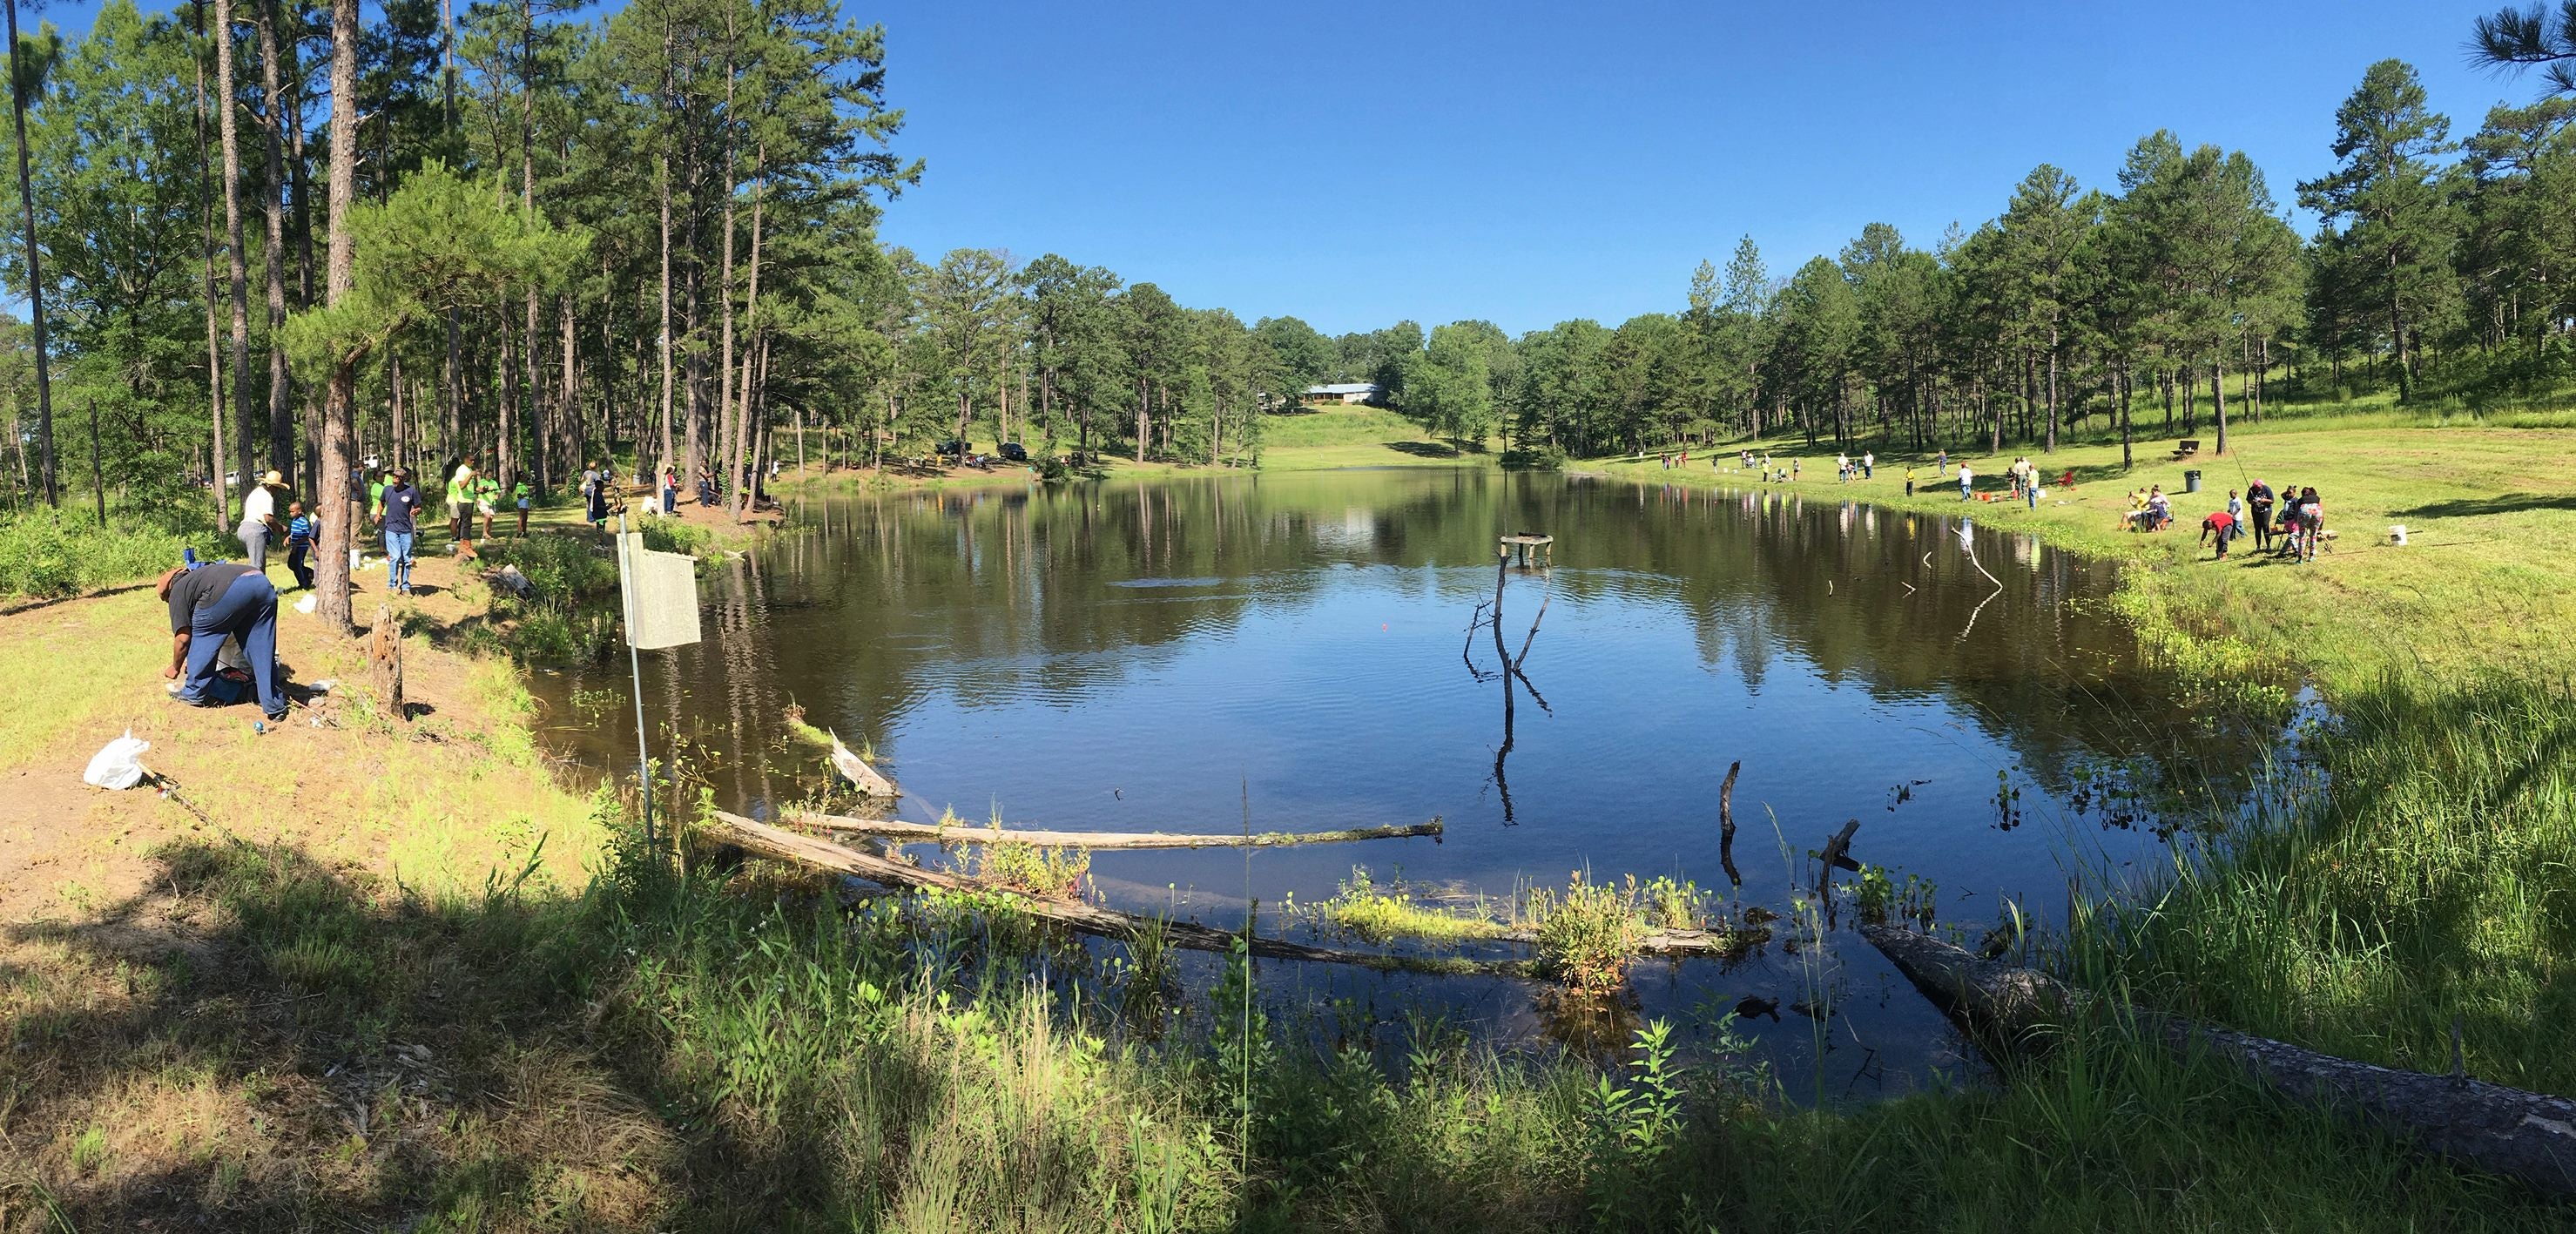 Camping, Open Trails and Fishing at the Forever Wild Wehle Tract